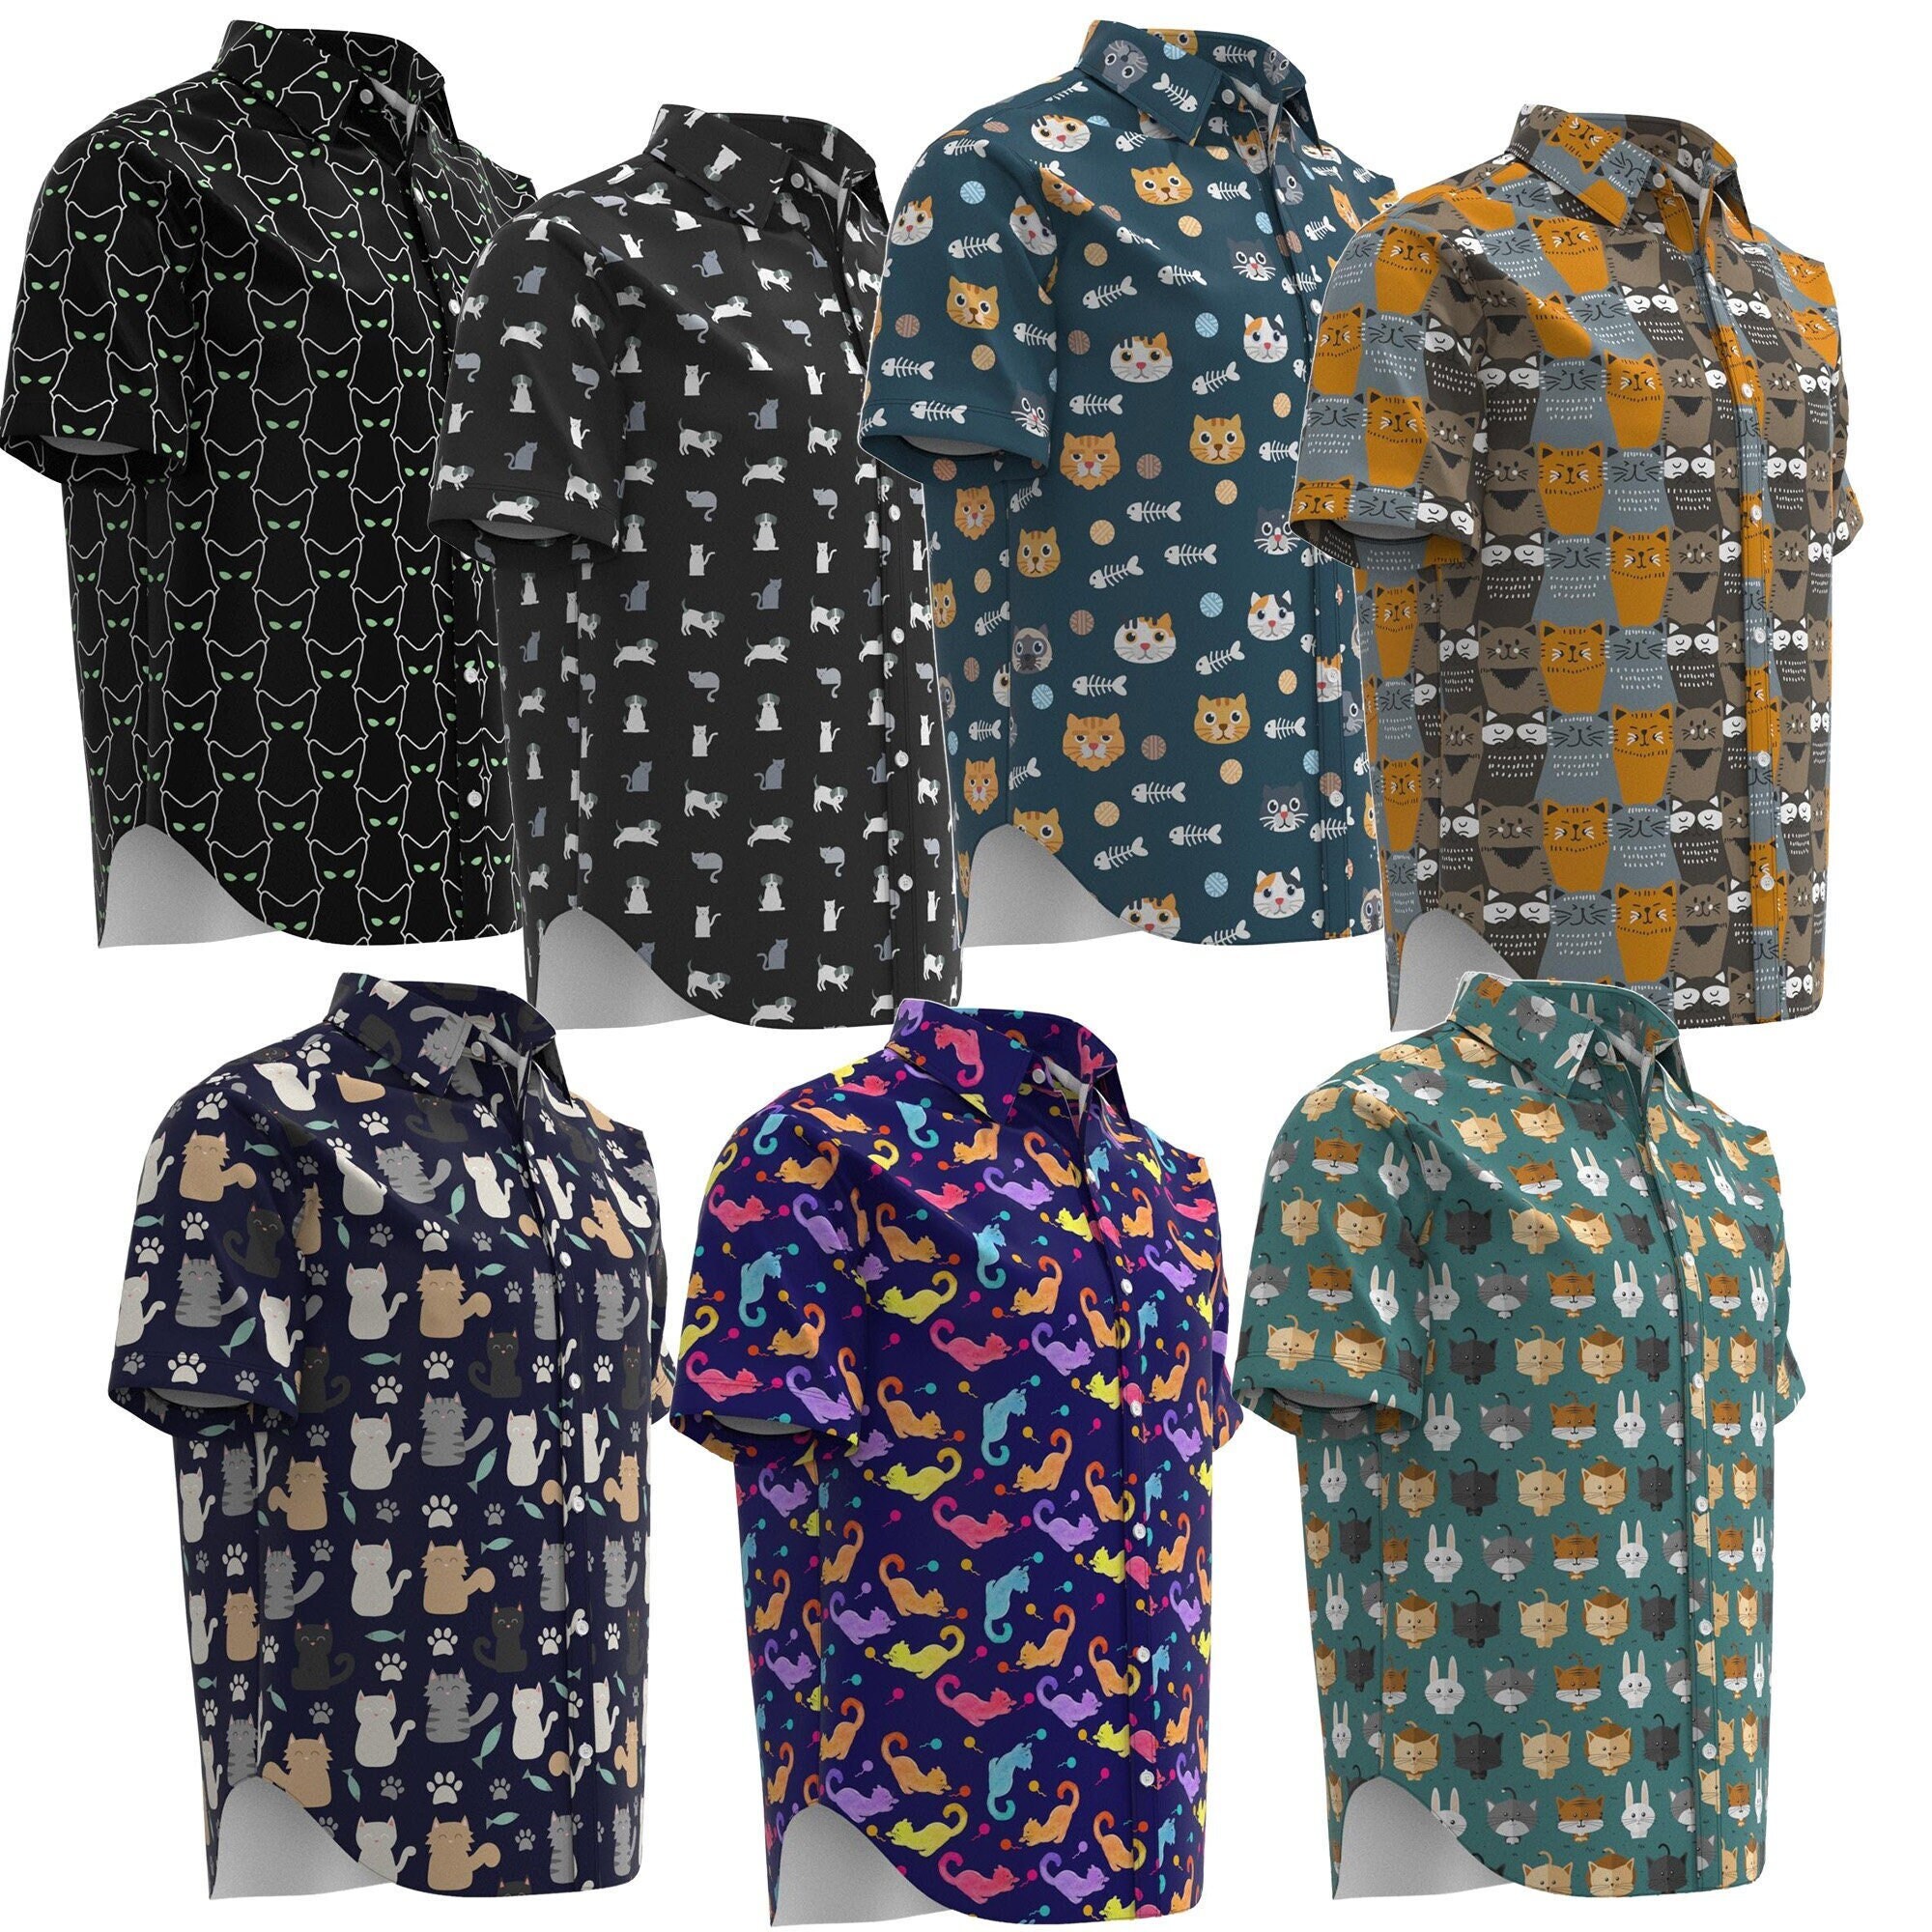 Short Sleeve Button Down Shirts For Men Who Love Cats! – Meow As Fluff